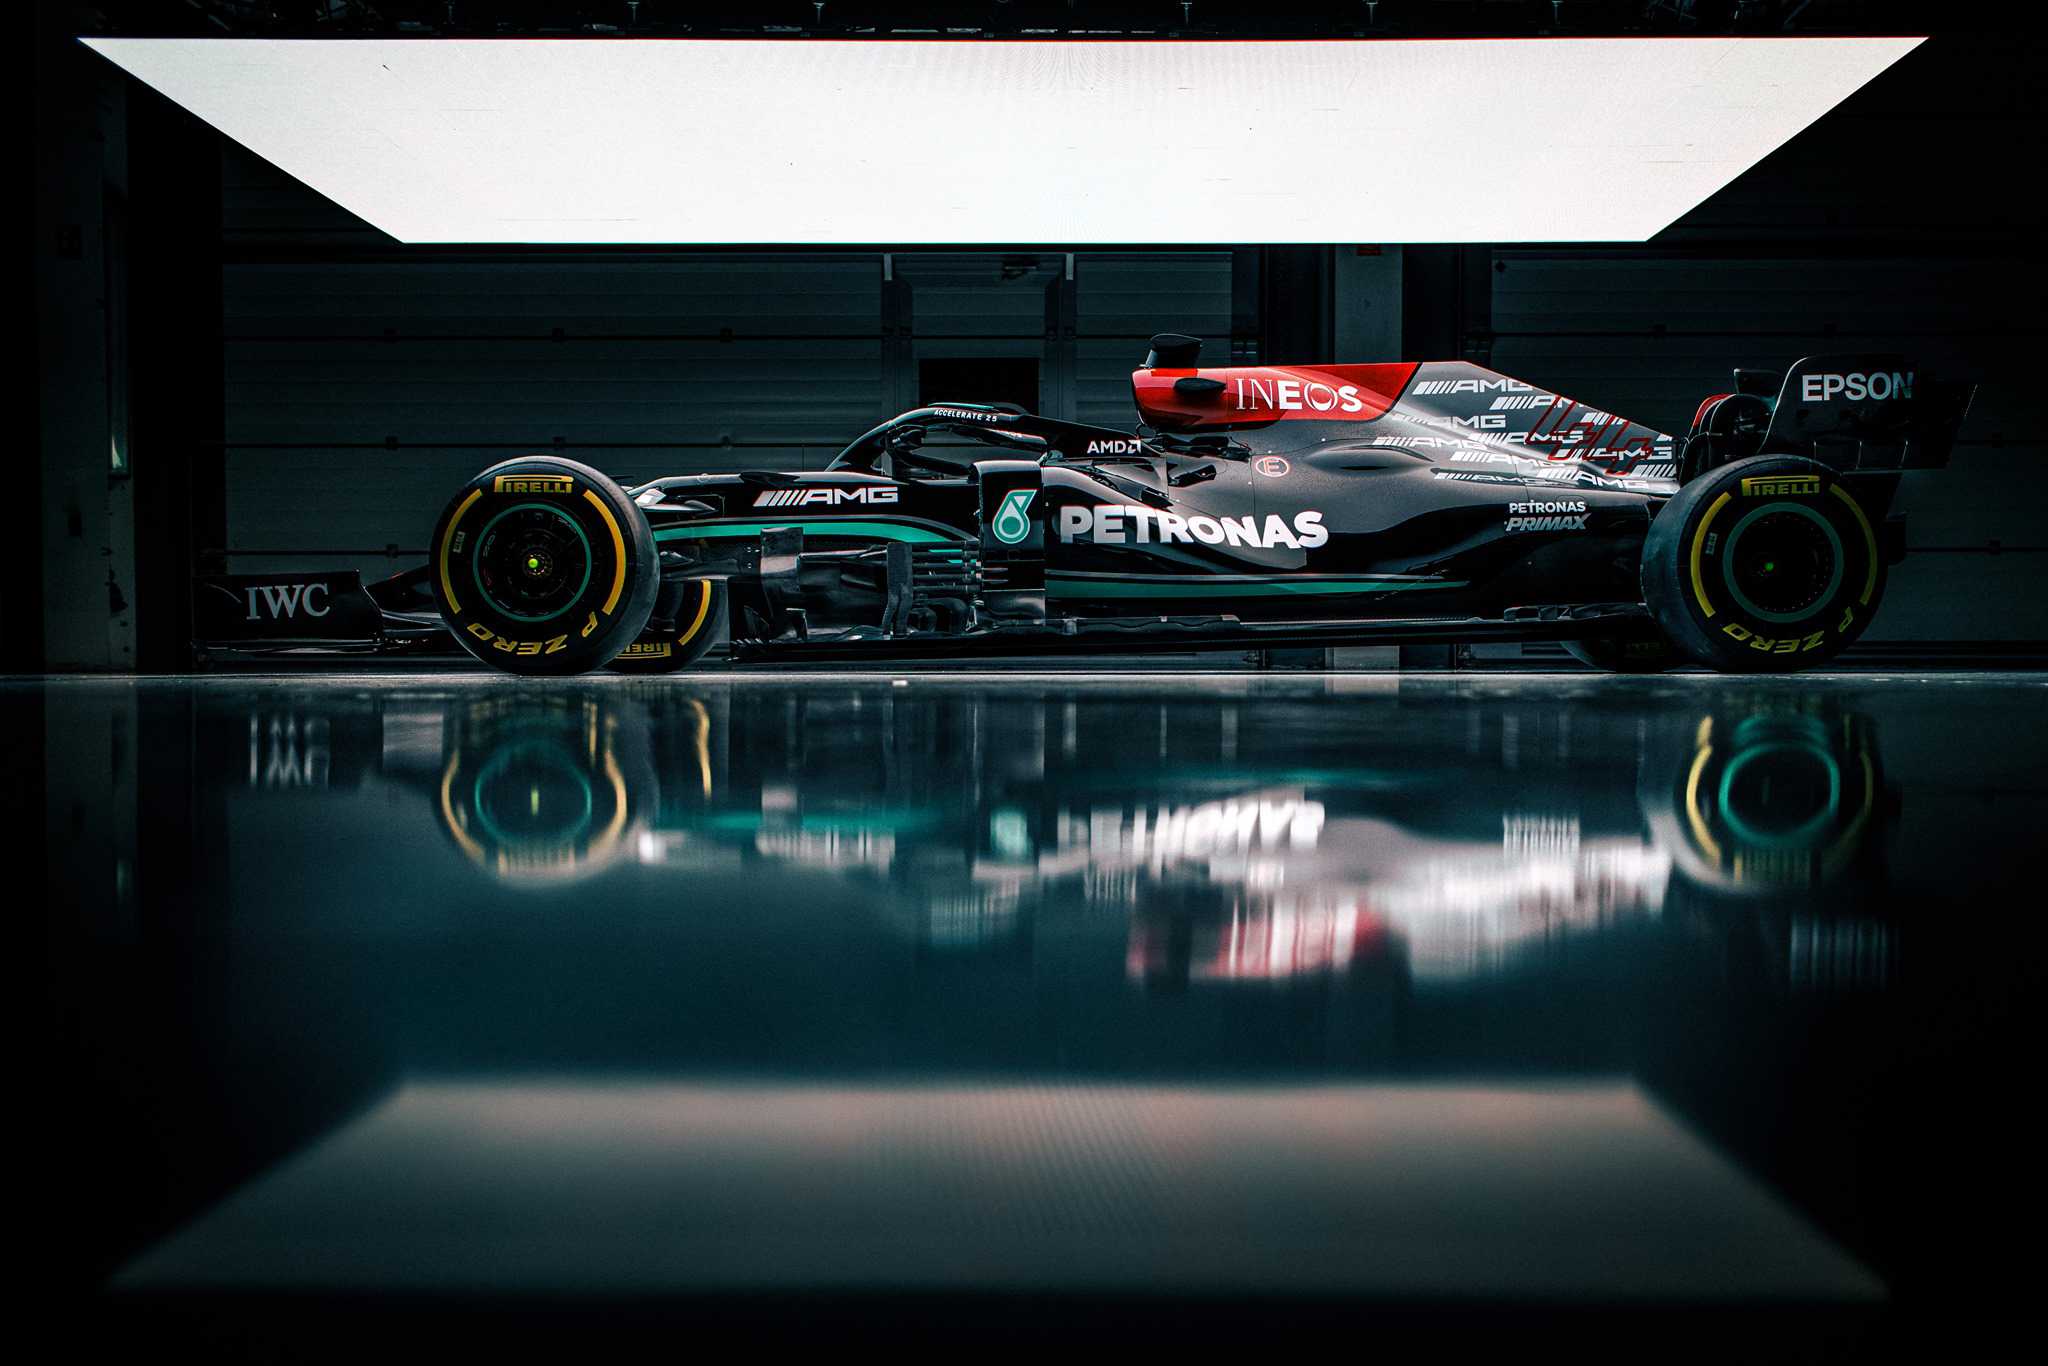 Petronas To End Partnership With Mercedes F1?